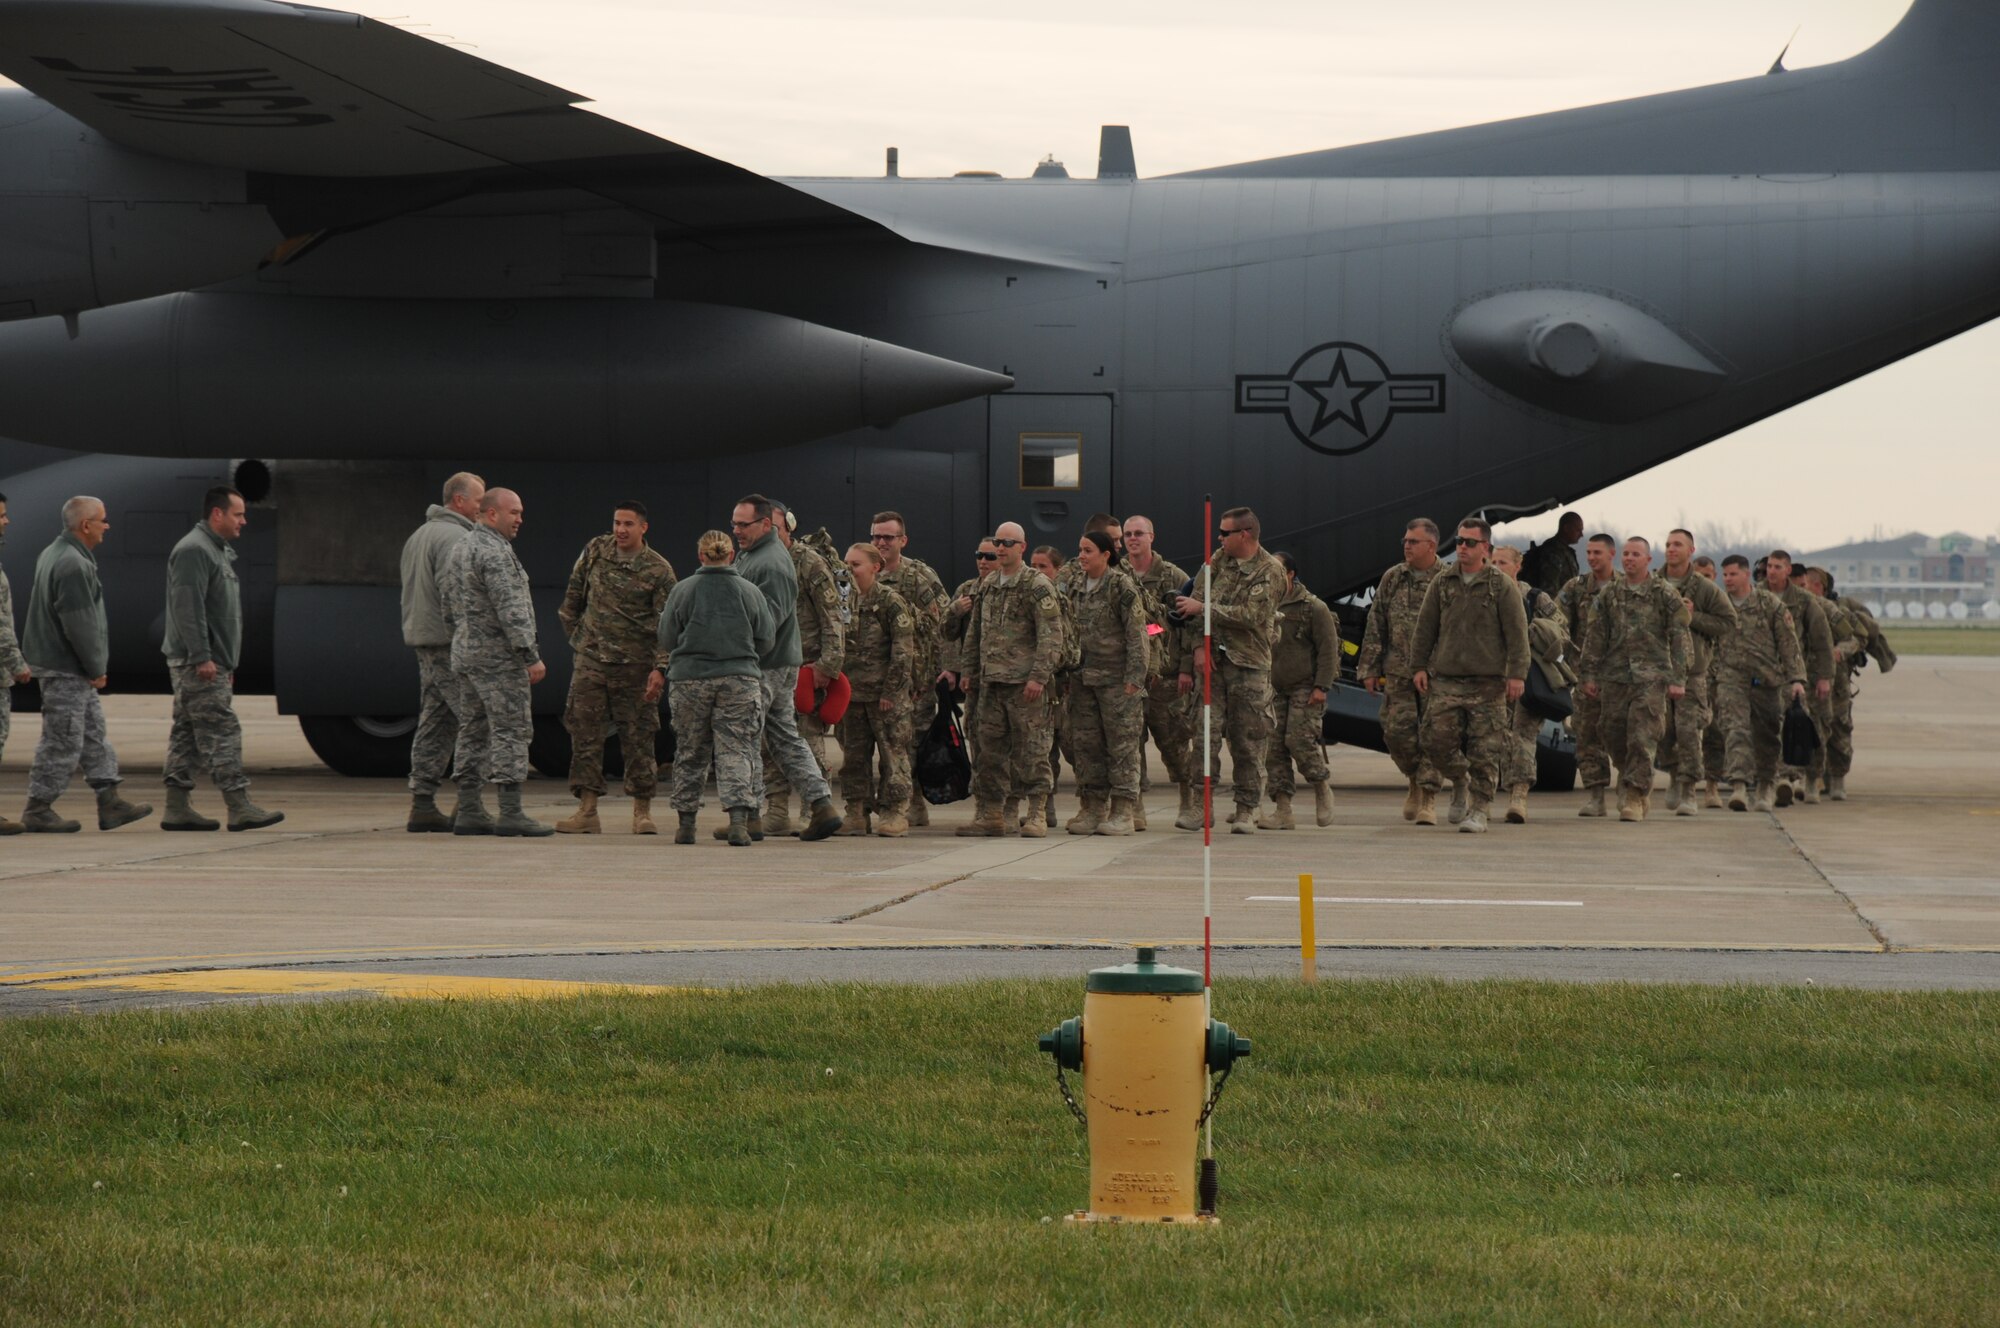 Members of the 30th Aerial Port Squadron return home Dec. 6, 2014 at Niagara Falls Air Reserve Station, N.Y. 35 personnel from the base were sent to a deployment in Afghanistan. (U.S. Air Force Photo by Staff Sgt. Matthew Burke)